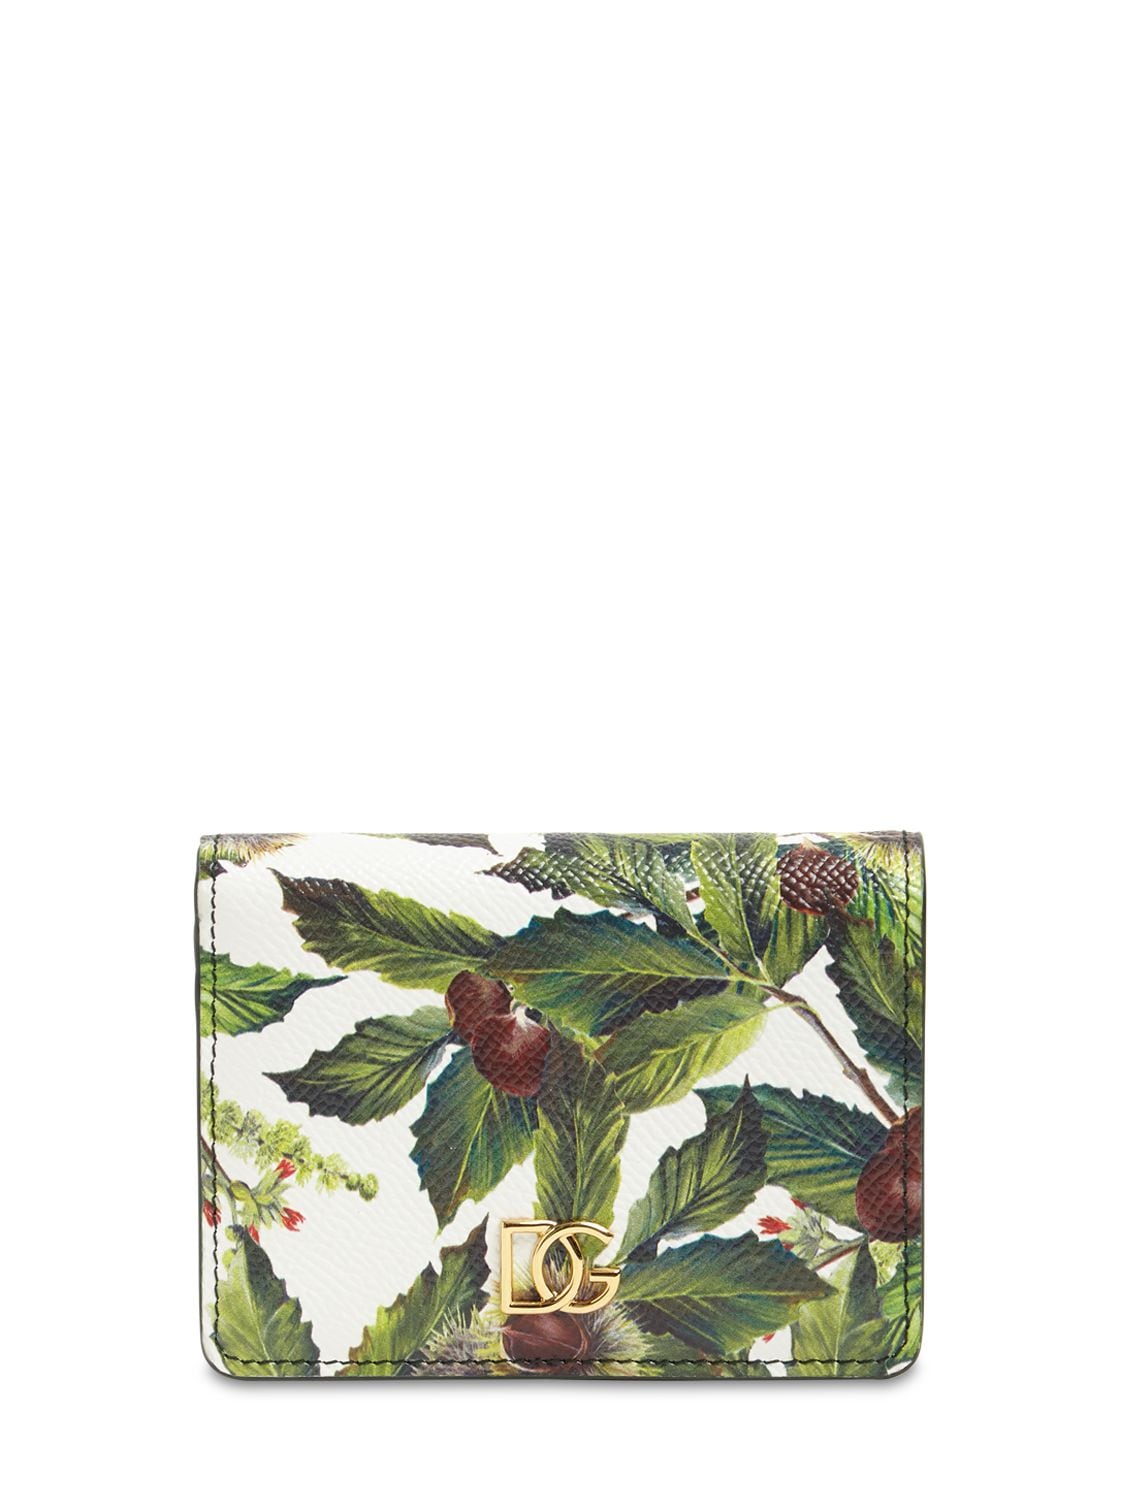 Dolce & Gabbana Printed Leather Compact Wallet In Castagni